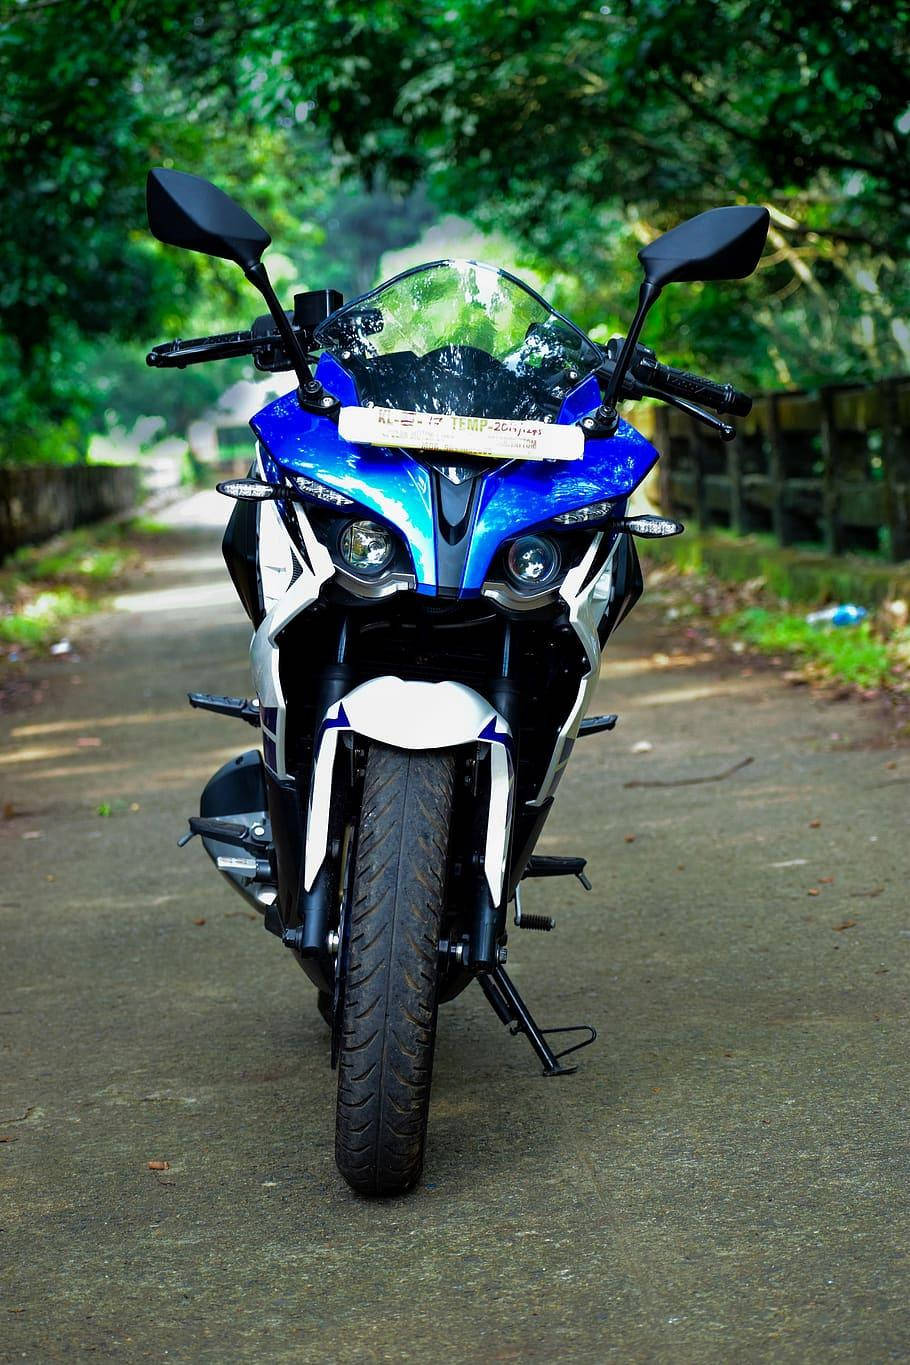 Pristine Blue Ns 200 Motorcycle Captured In High Definition